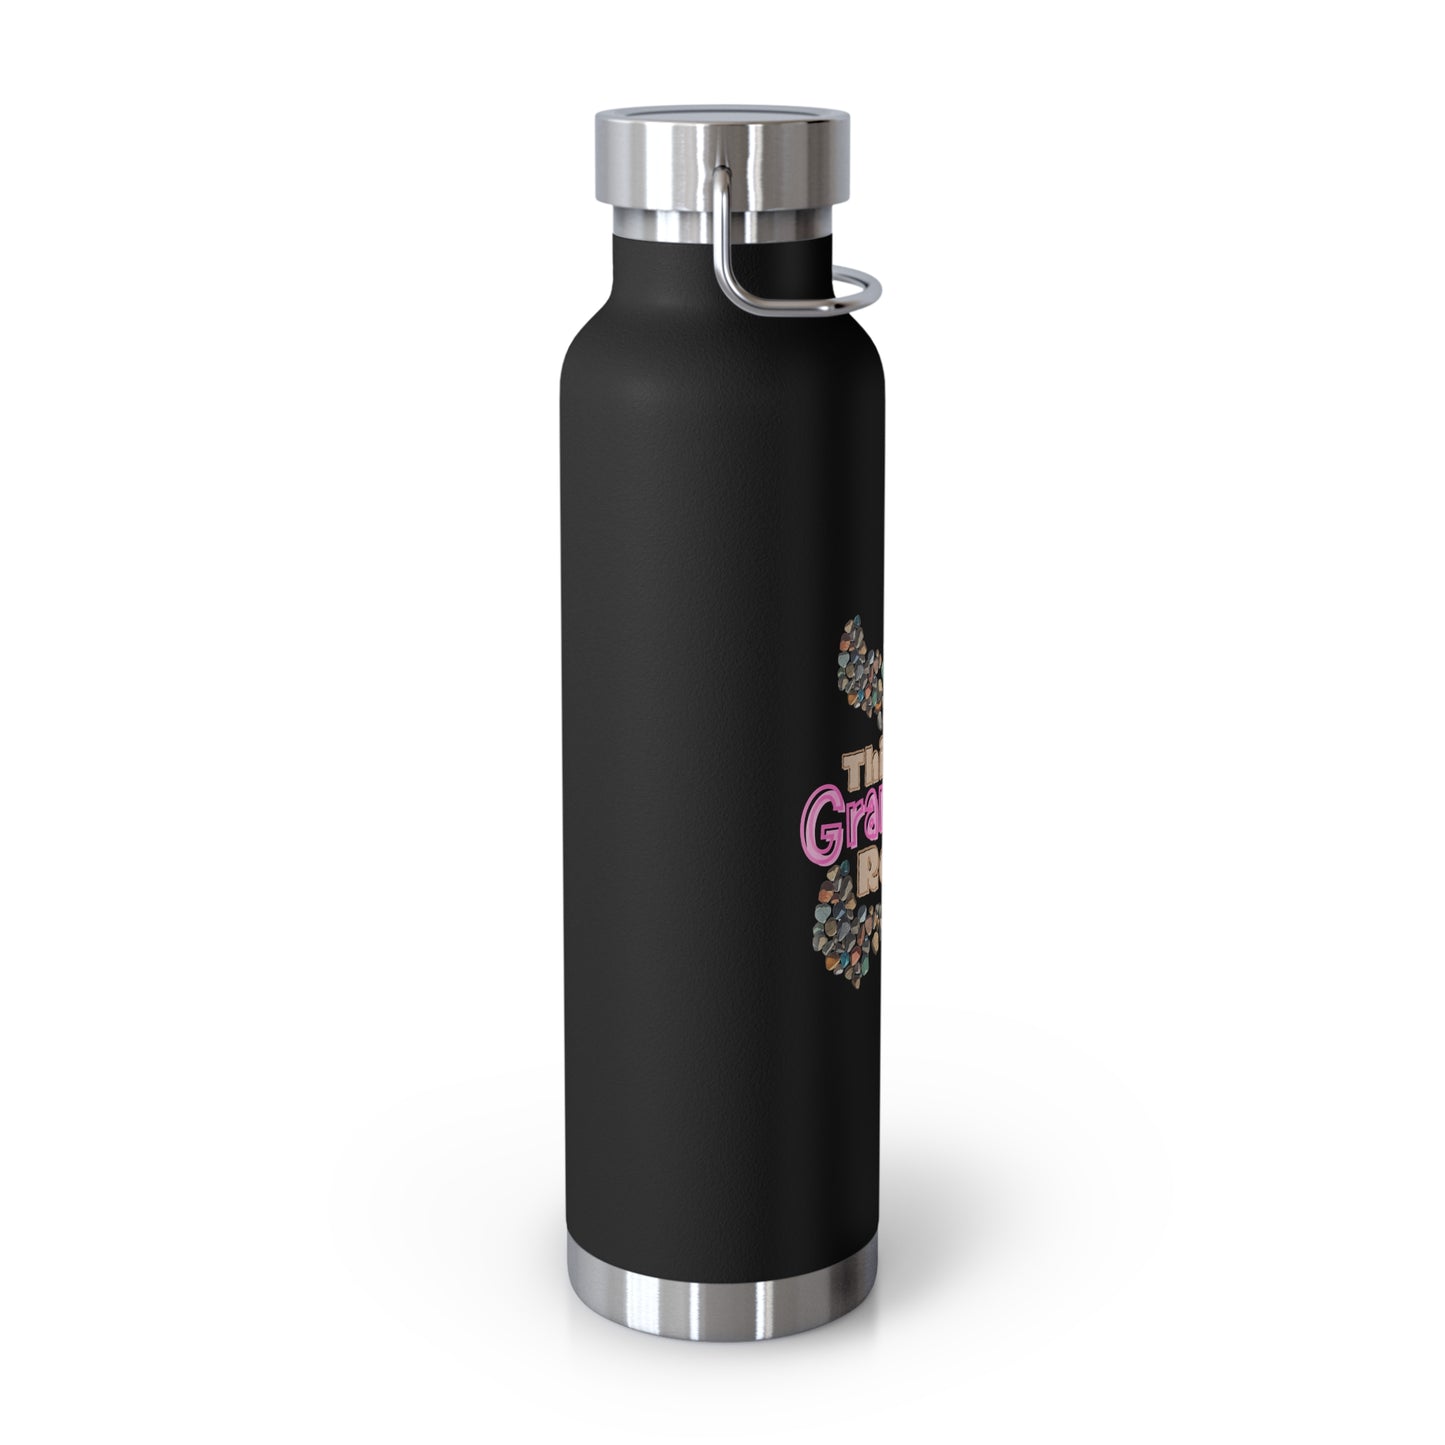 Mother’s Day: This Grandma Rocks - Copper Vacuum Insulated Bottle, 22oz